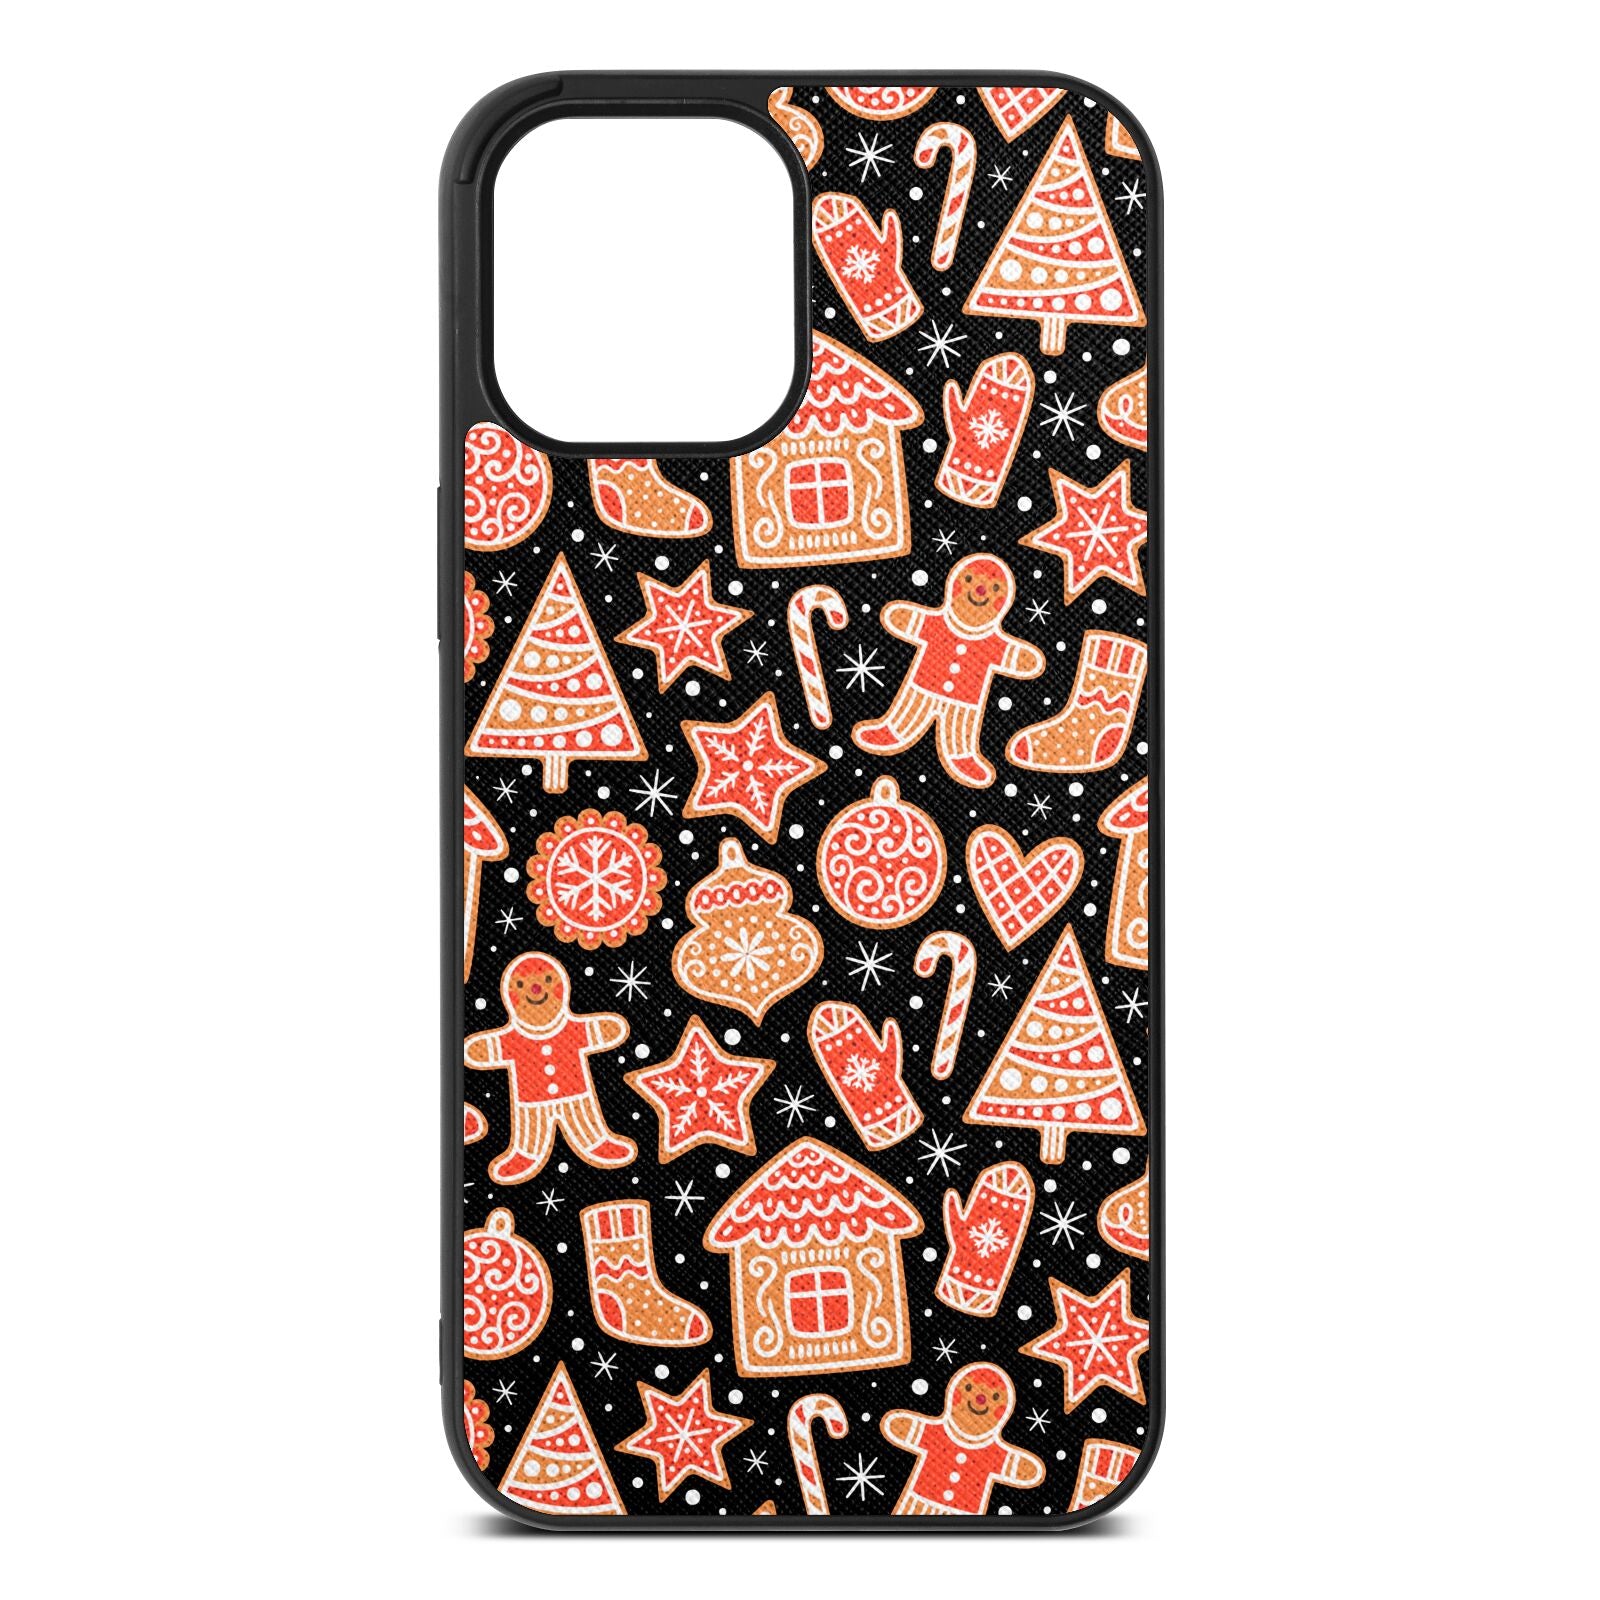 Christmas Gingerbread Black Saffiano Leather iPhone 12 Pro Max Case